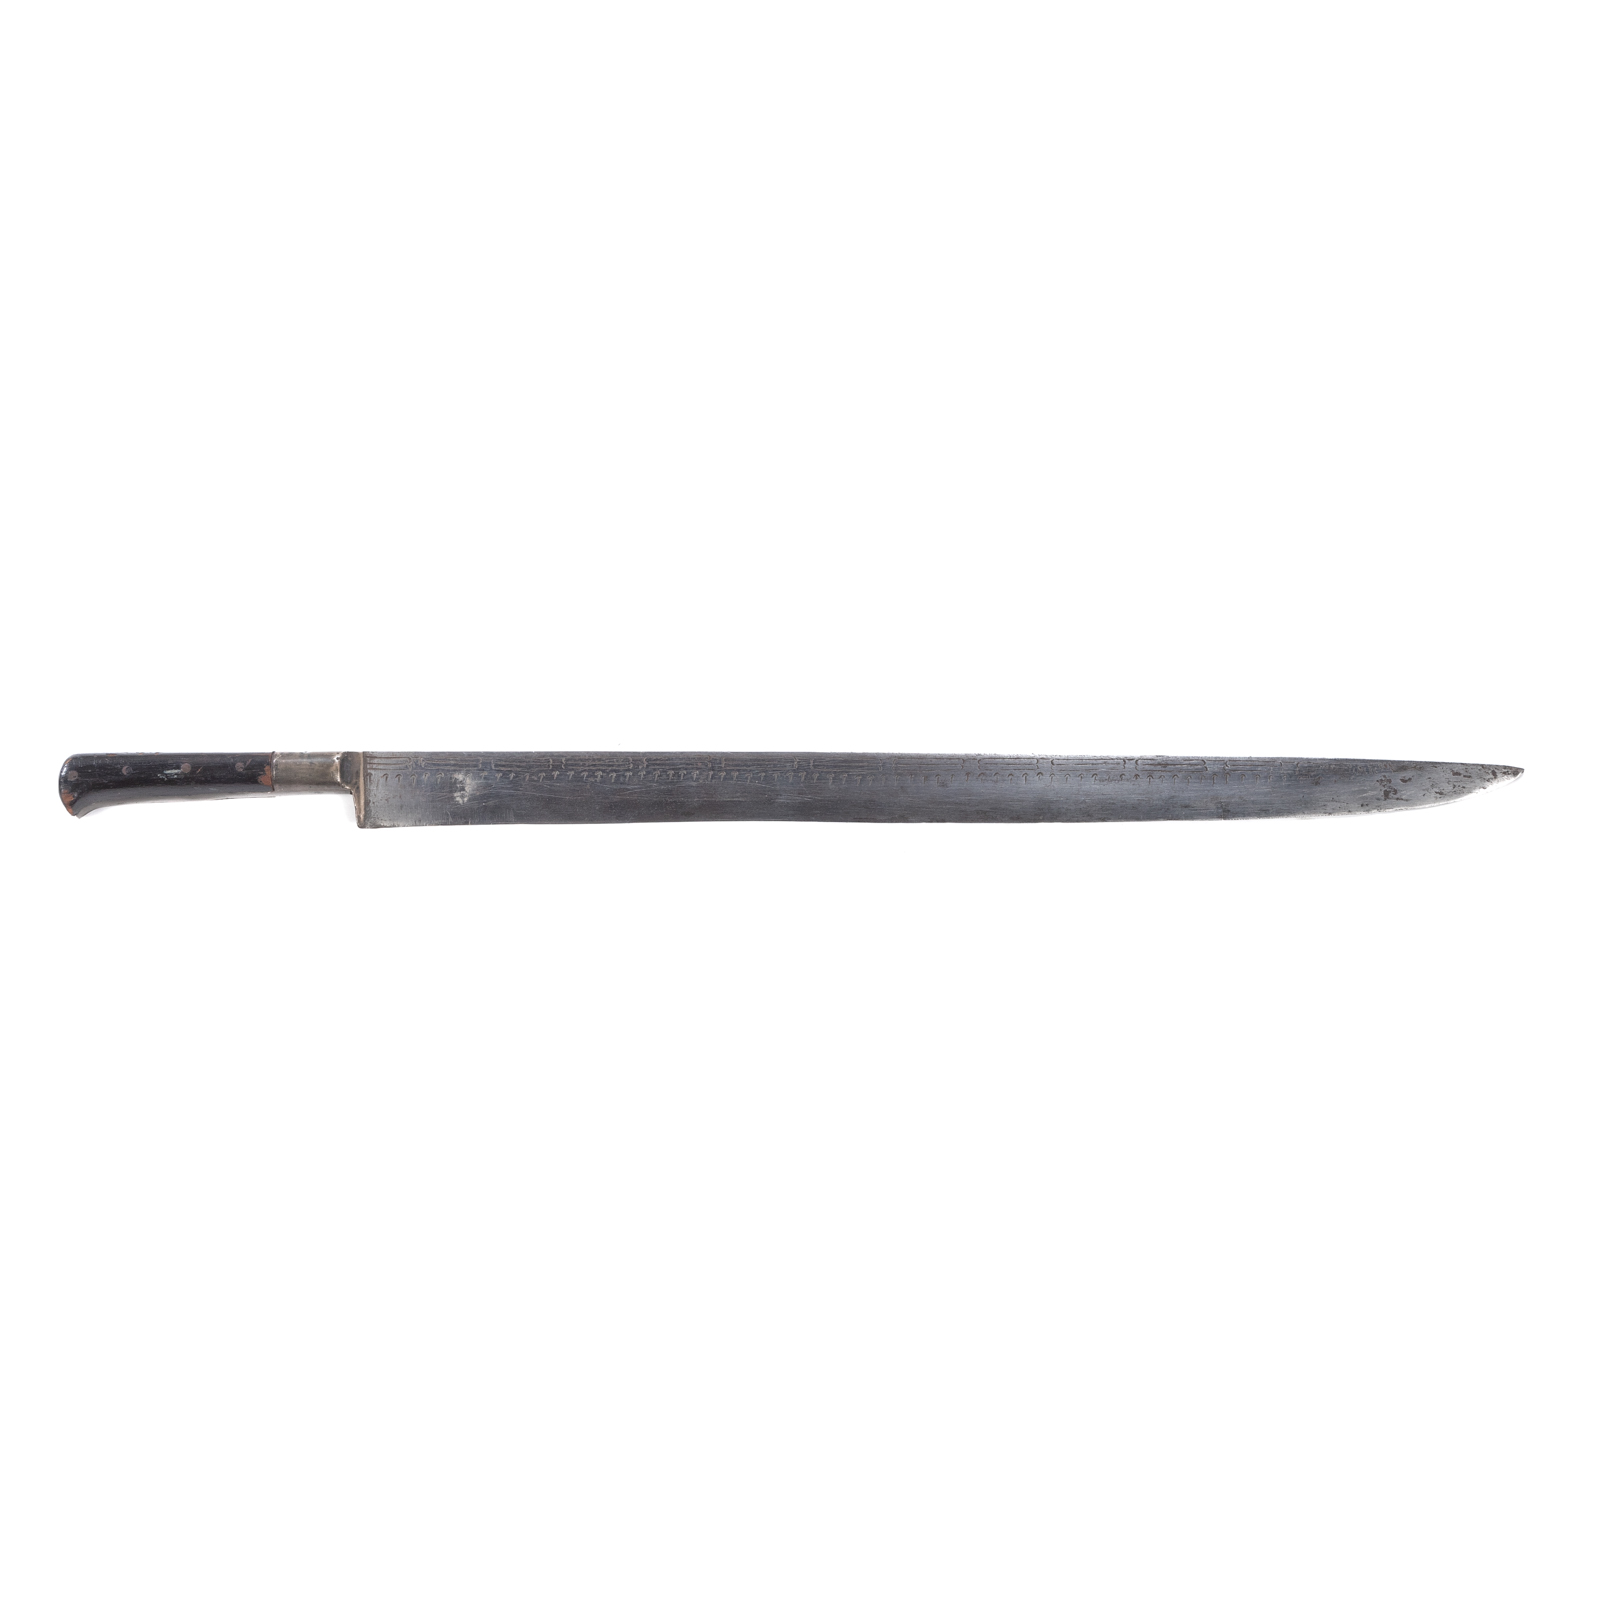 HAND CRAFTED SHORT SWORD Possibly 2e9062